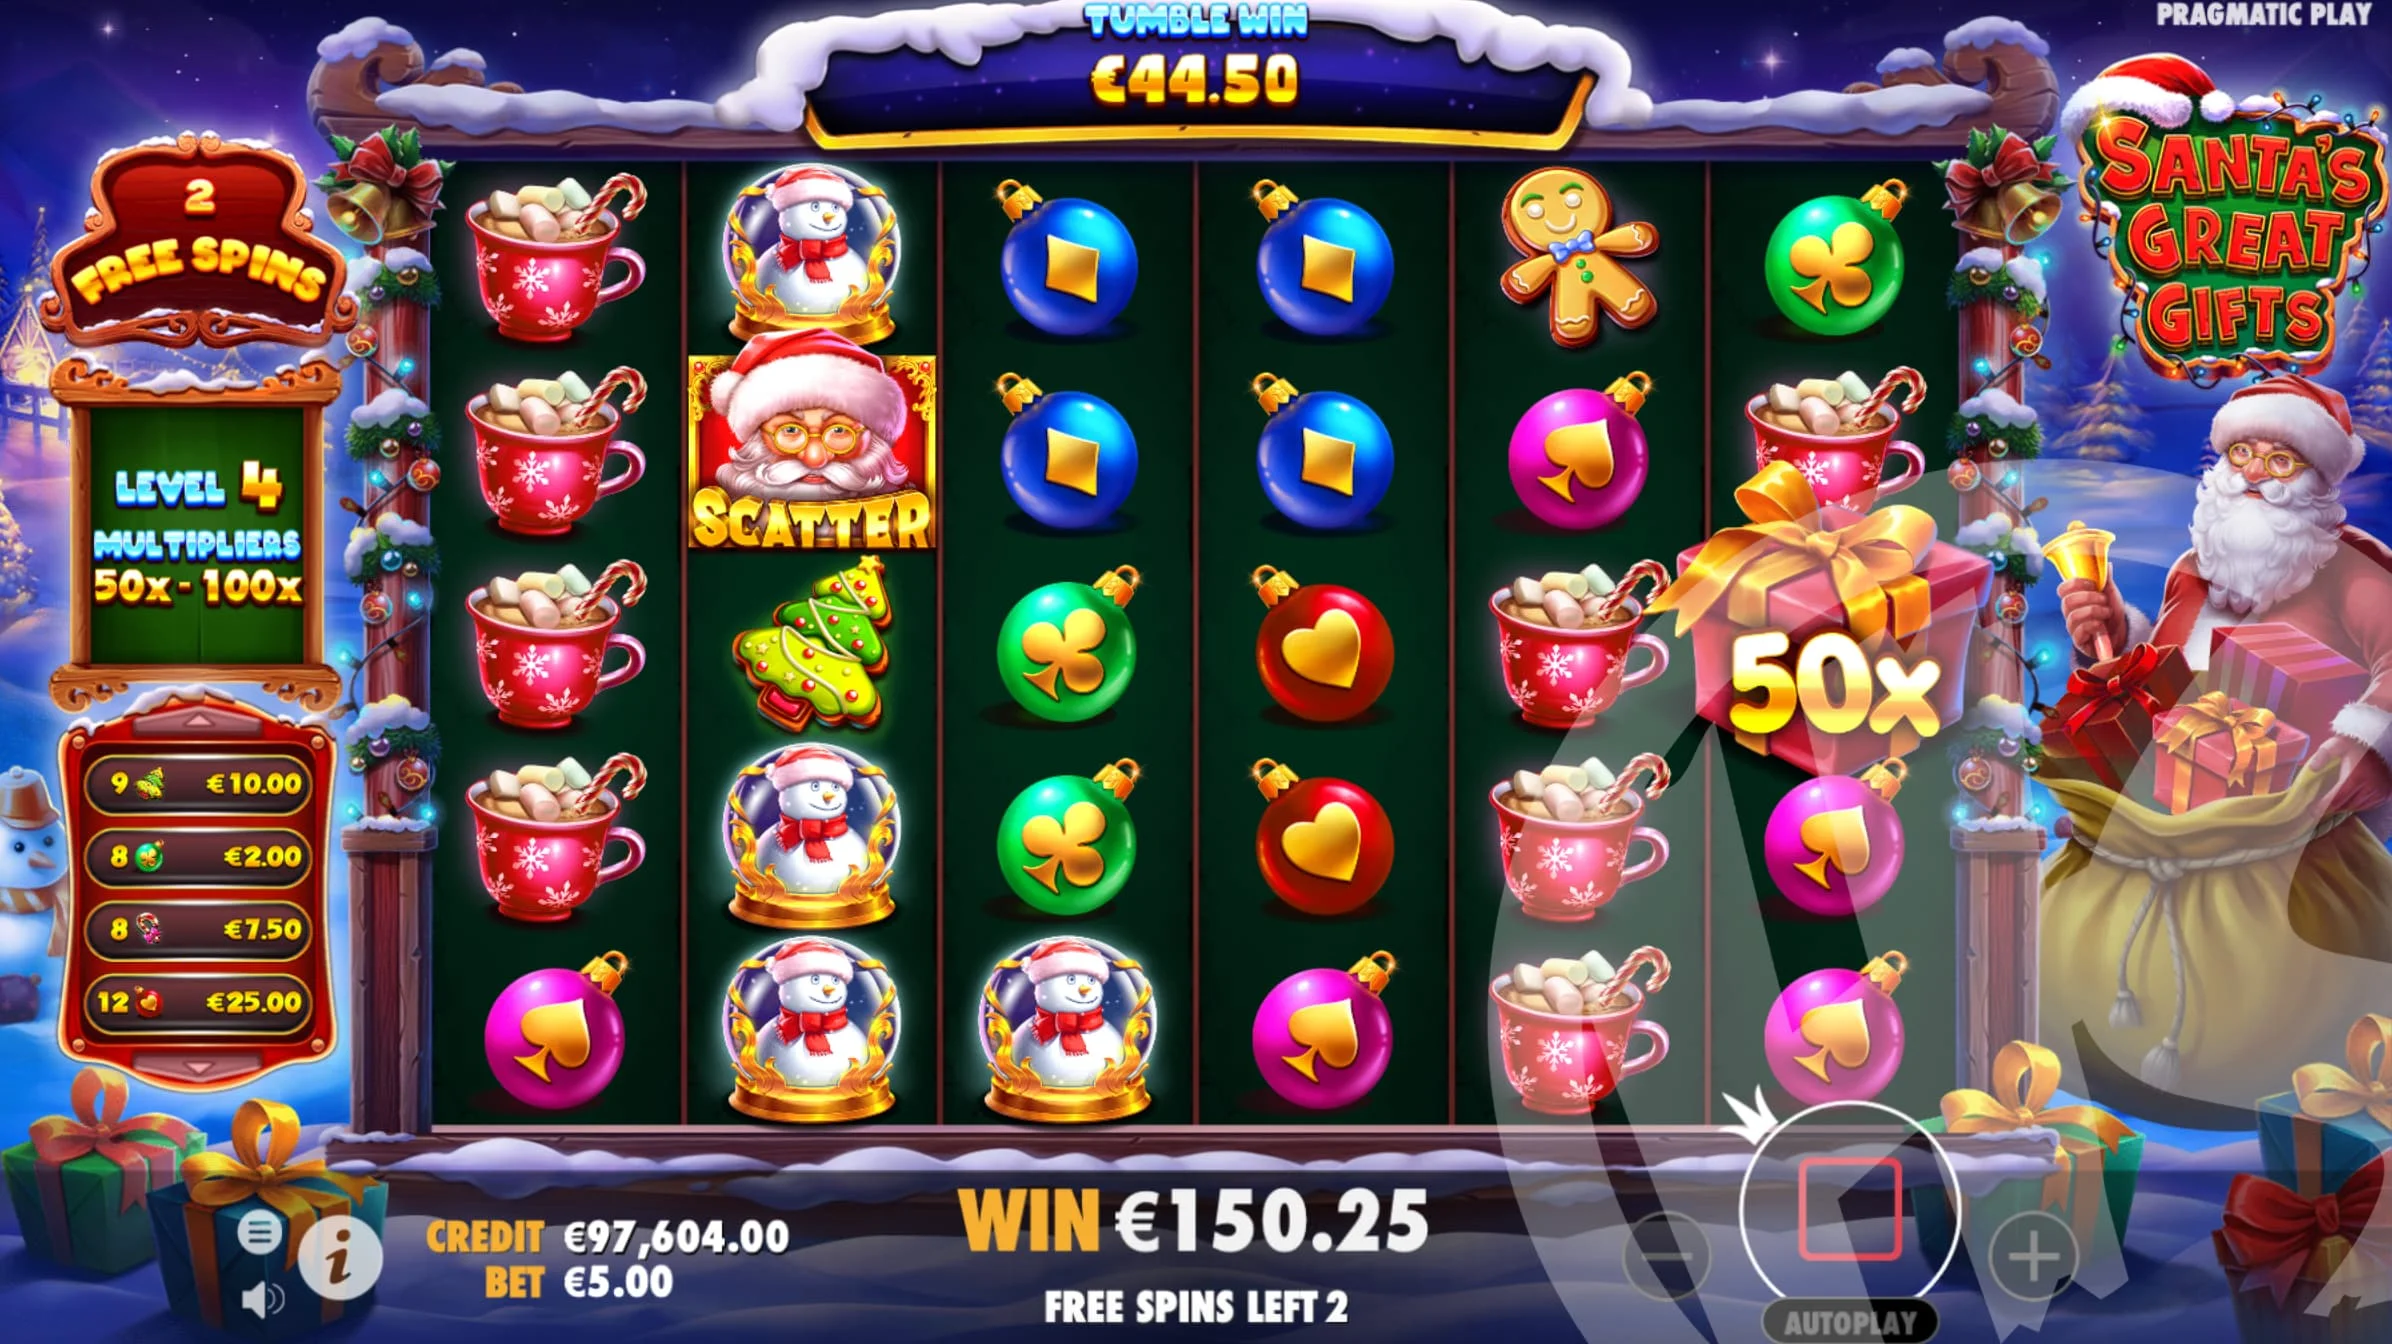 Climb Levels to Reveal Multipliers up to x100 During Free Spins